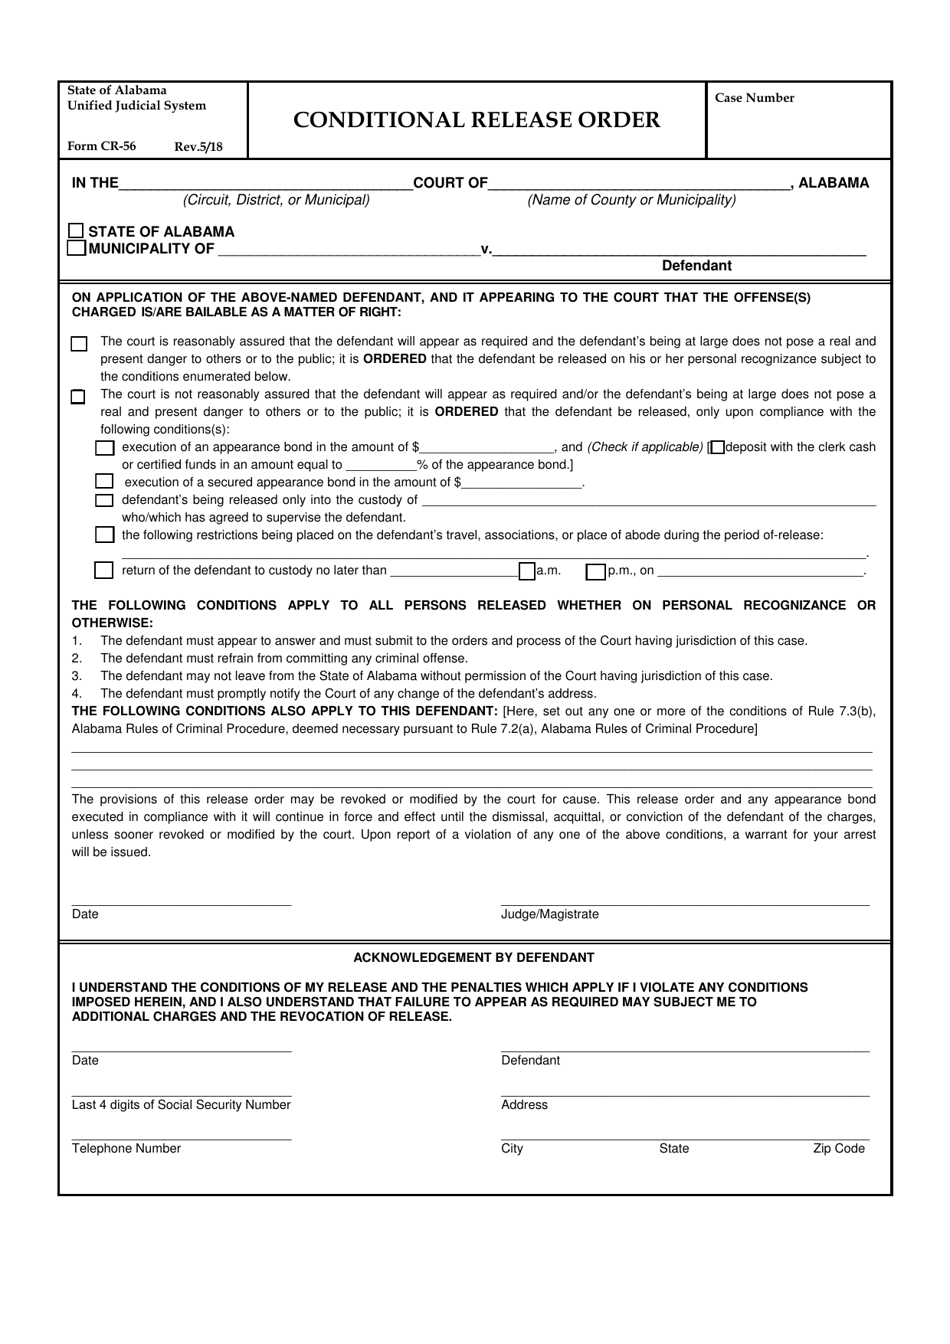 Form CR-56 Conditional Release Order - Alabama, Page 1